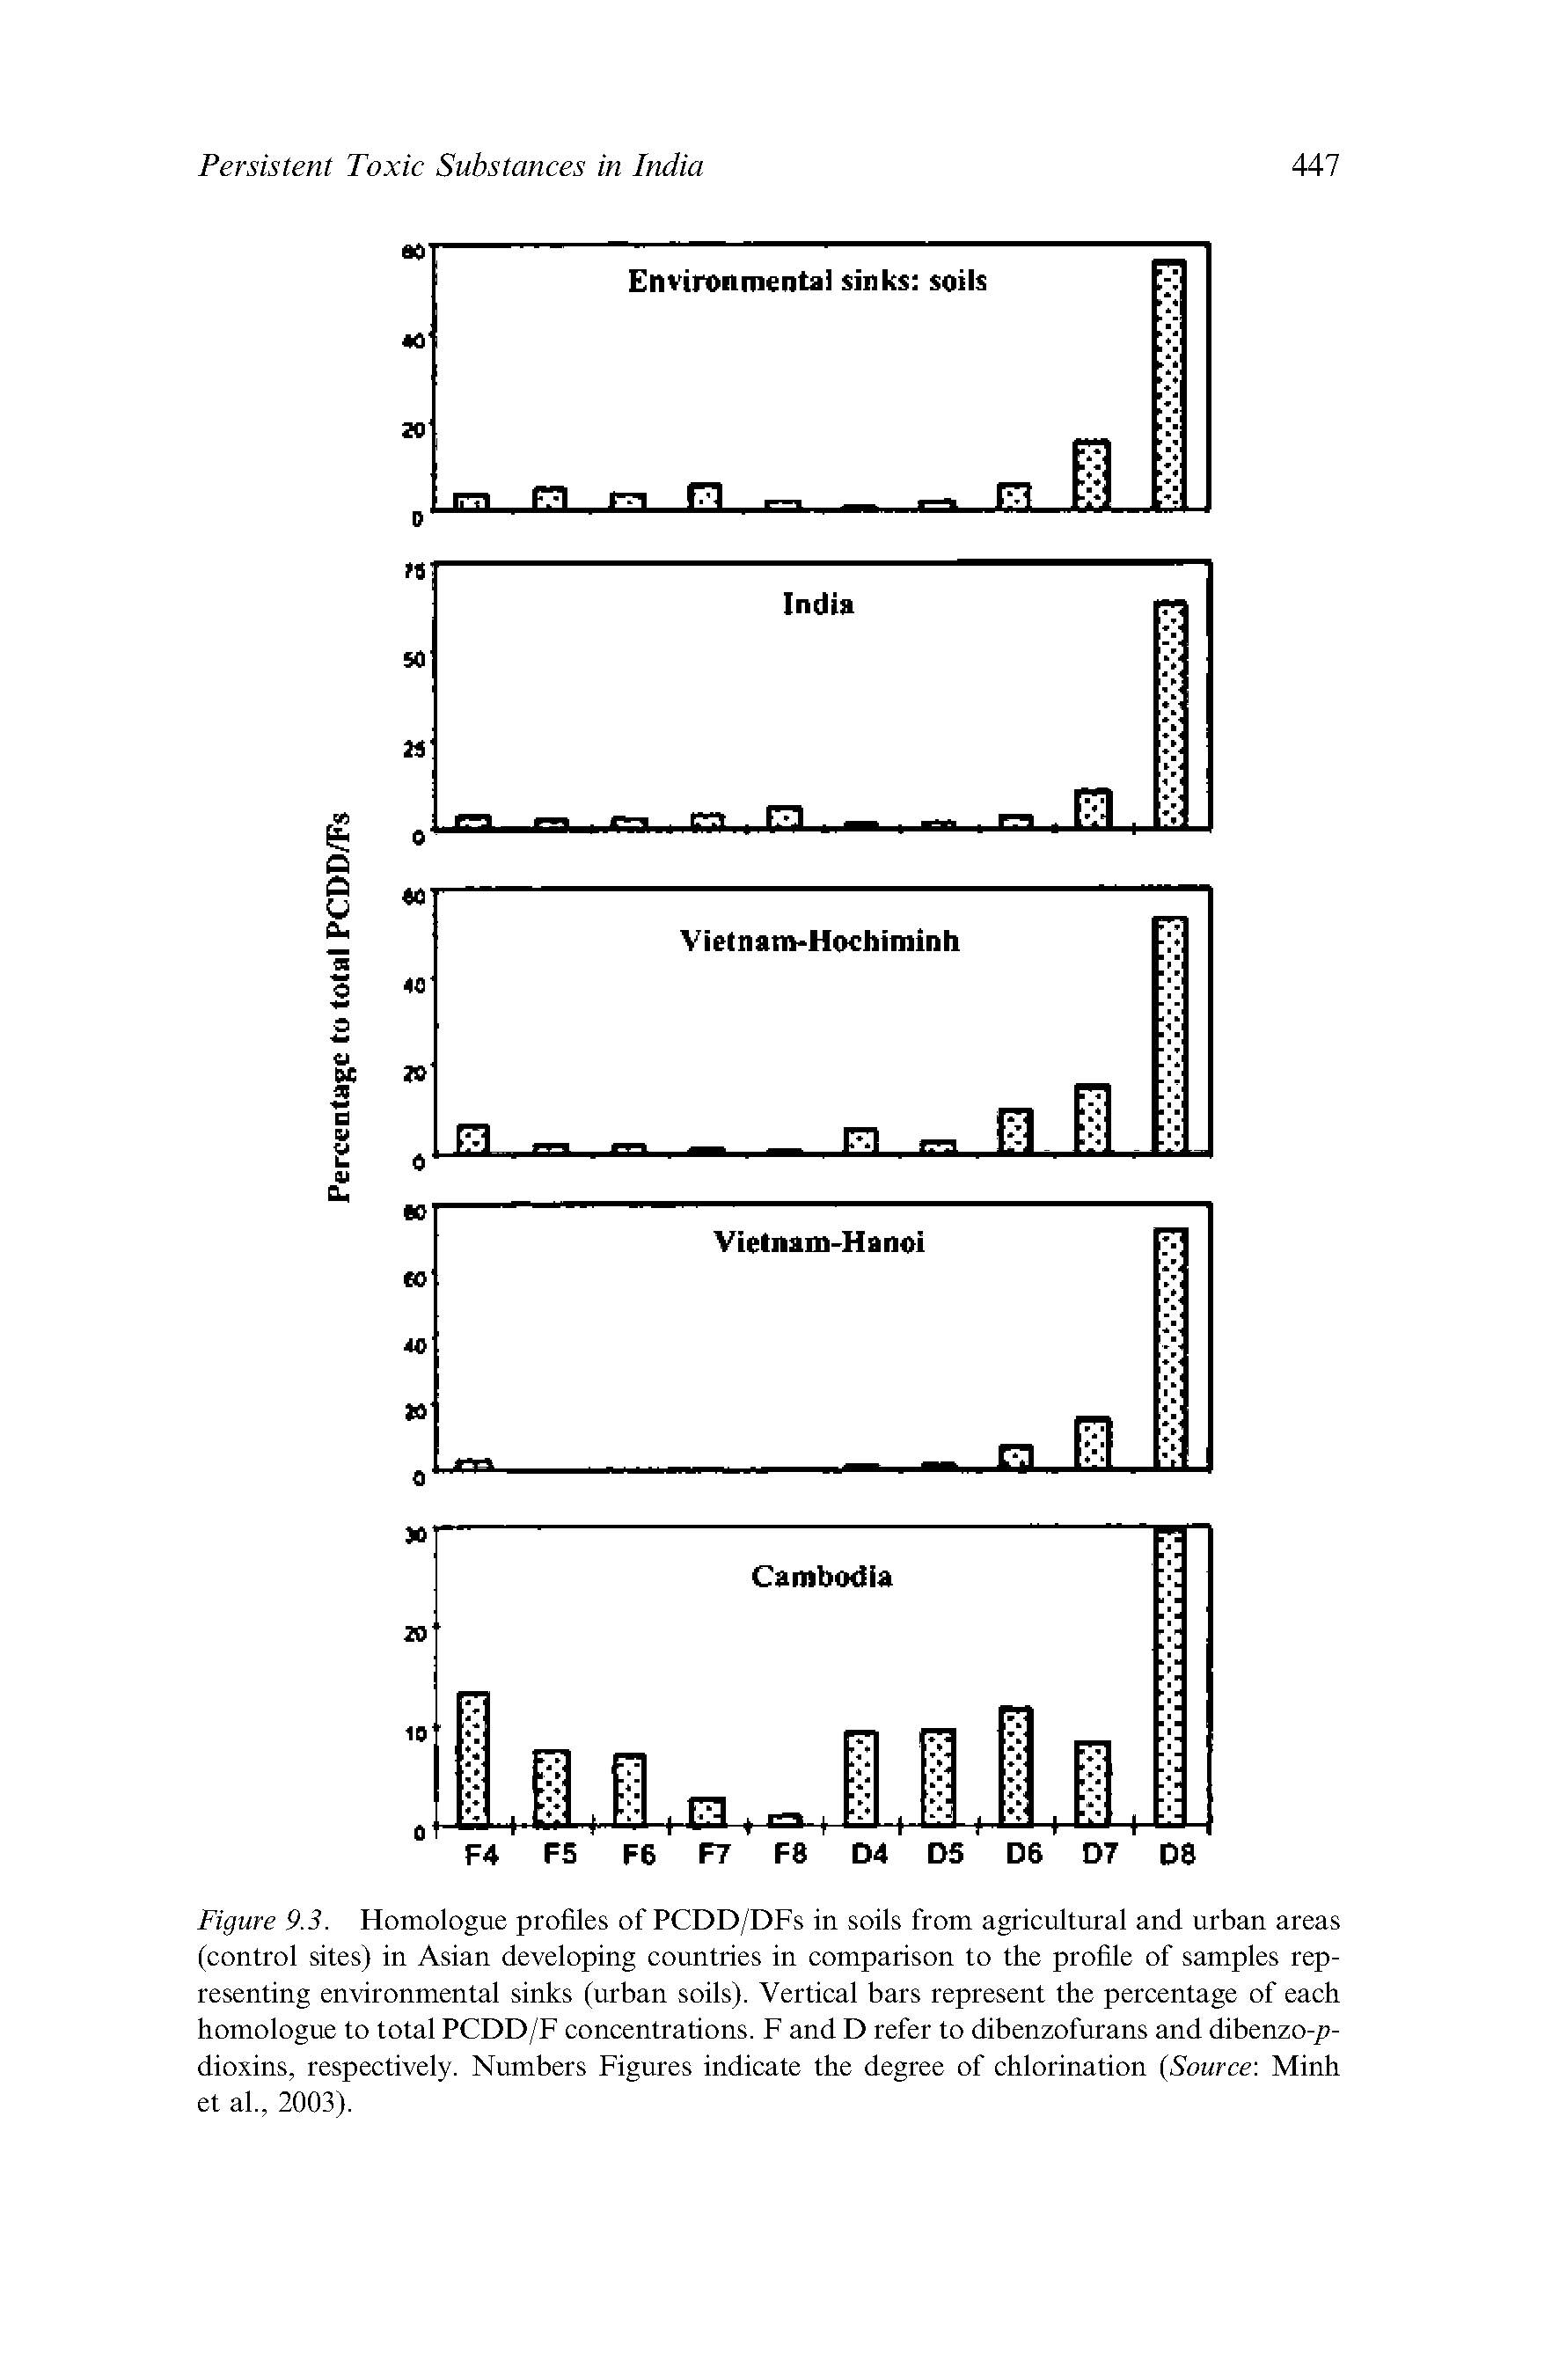 Figure 9.3. Homologue profiles of PCDD/DFs in soils from agricultural and urban areas (control sites) in Asian developing countries in comparison to the profile of samples representing environmental sinks (urban soils). Vertical bars represent the percentage of each homologue to total PCDD/F concentrations. F and D refer to dibenzofurans and dibenzo-p-dioxins, respectively. Numbers Figures indicate the degree of chlorination (Source Minh et al., 2003).